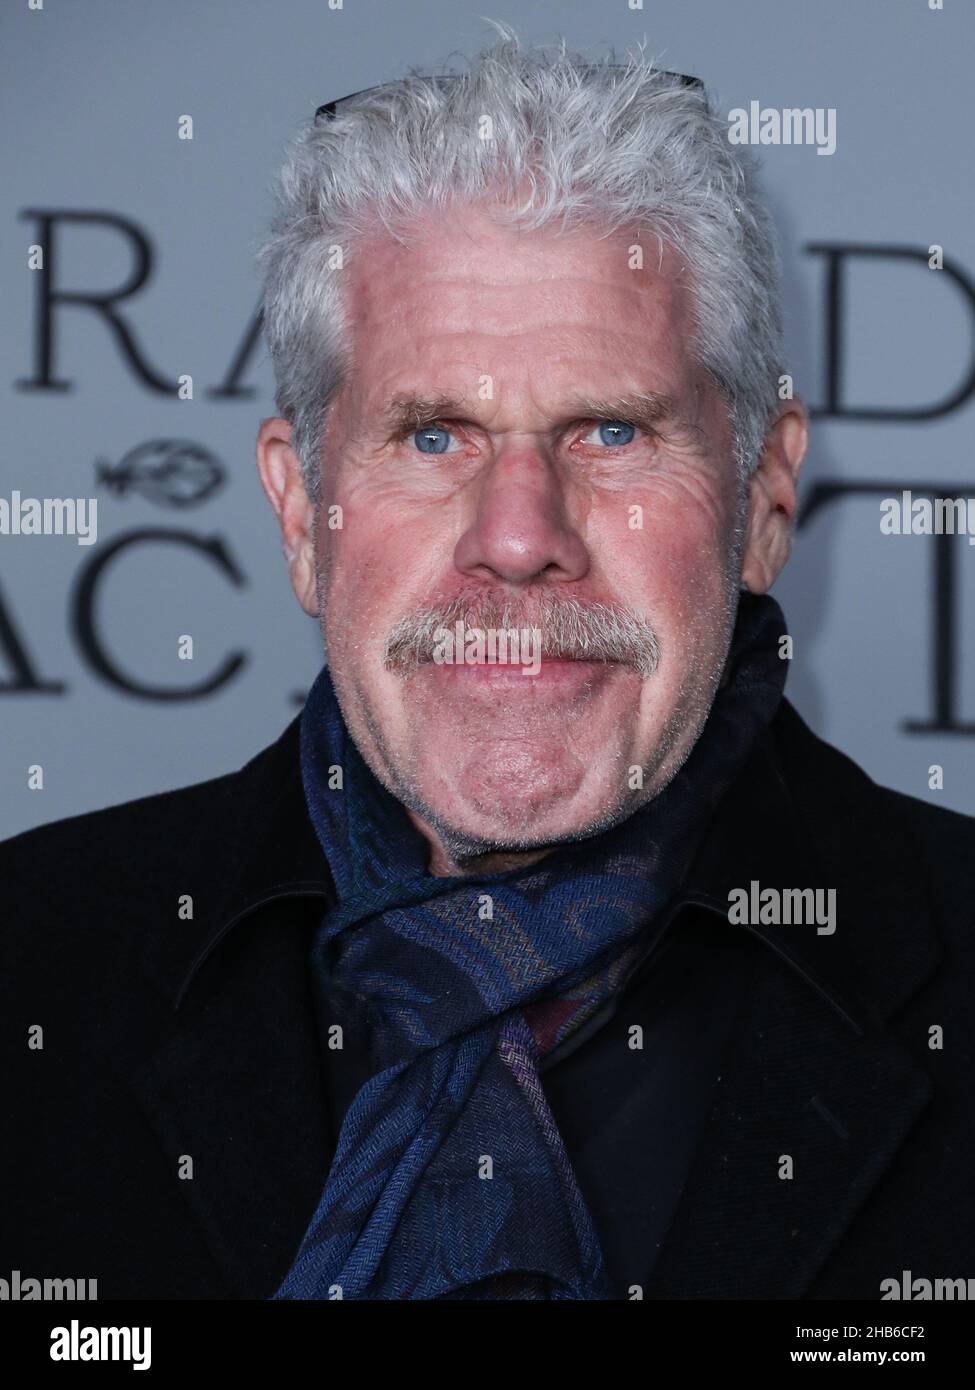 Los Angeles, USA. 16th Dec, 2021. LOS ANGELES, CALIFORNIA, USA - DECEMBER 16: American actor Ron Perlman arrives at the Los Angeles Premiere Of Apple Original Films' and A24's 'The Tragedy Of Macbeth' held at the Directors Guild of America Theater Complex on December 16, 2021 in Los Angeles, California, USA. (Photo by Xavier Collin/Image Press Agency/Sipa USA) Credit: Sipa USA/Alamy Live News Stock Photo